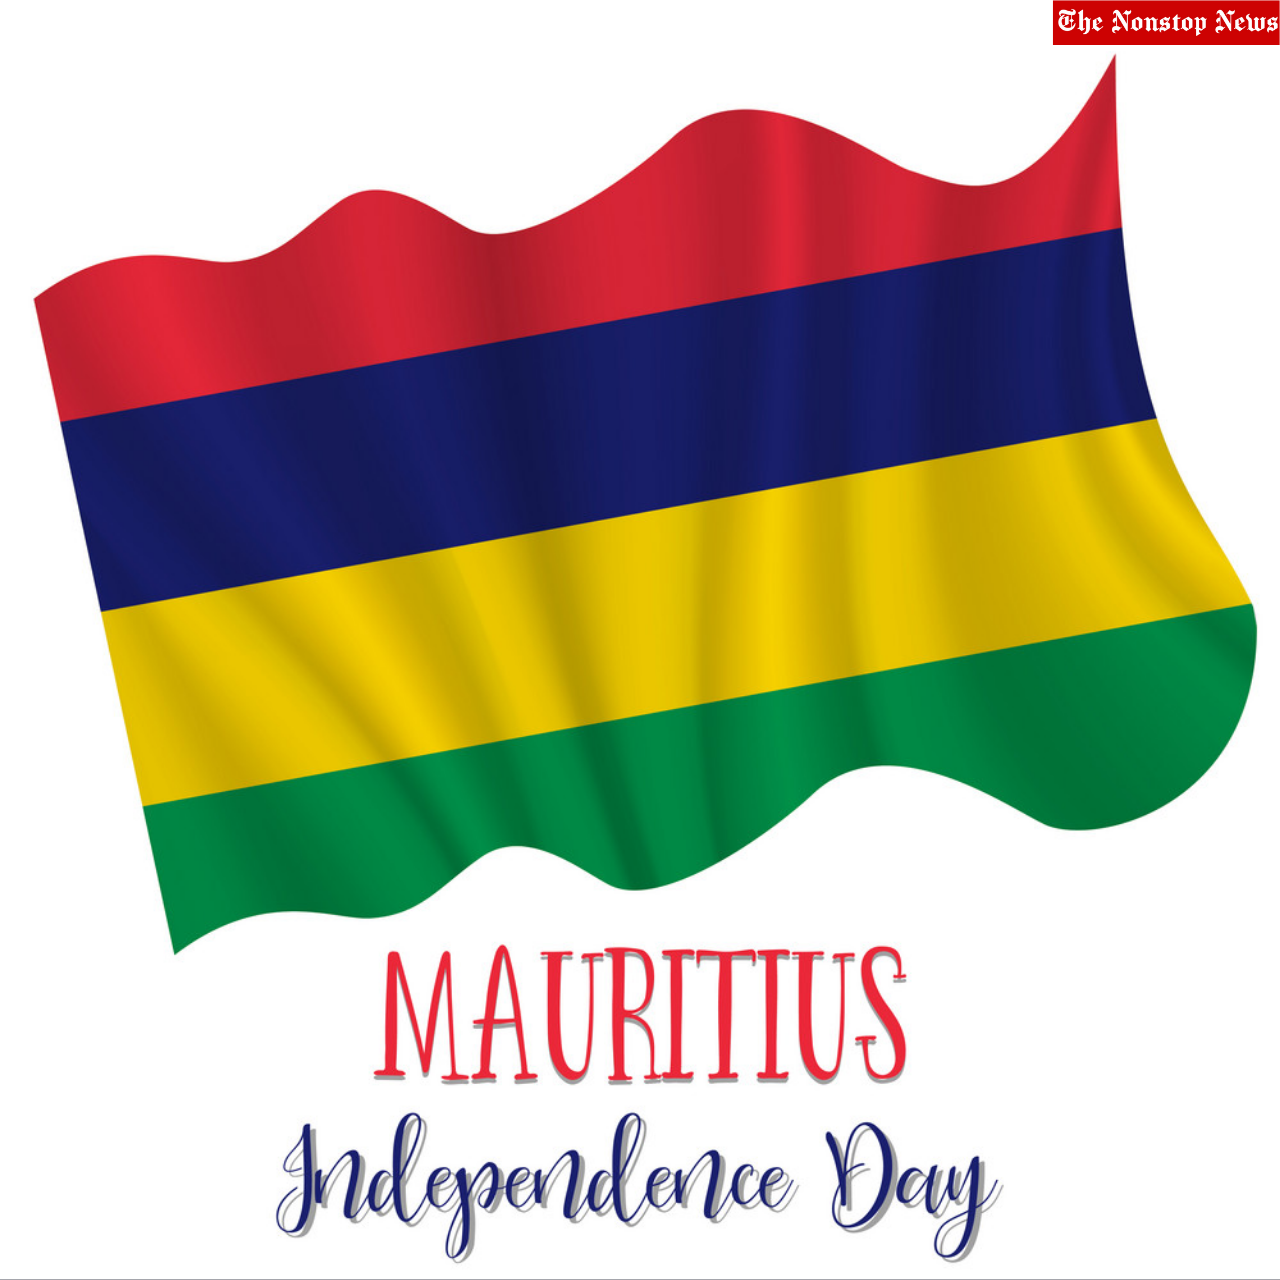 Mauritius Independence Day 2022 Quotes, Wishes, Poem, Messages, Slogans, HD Images to share